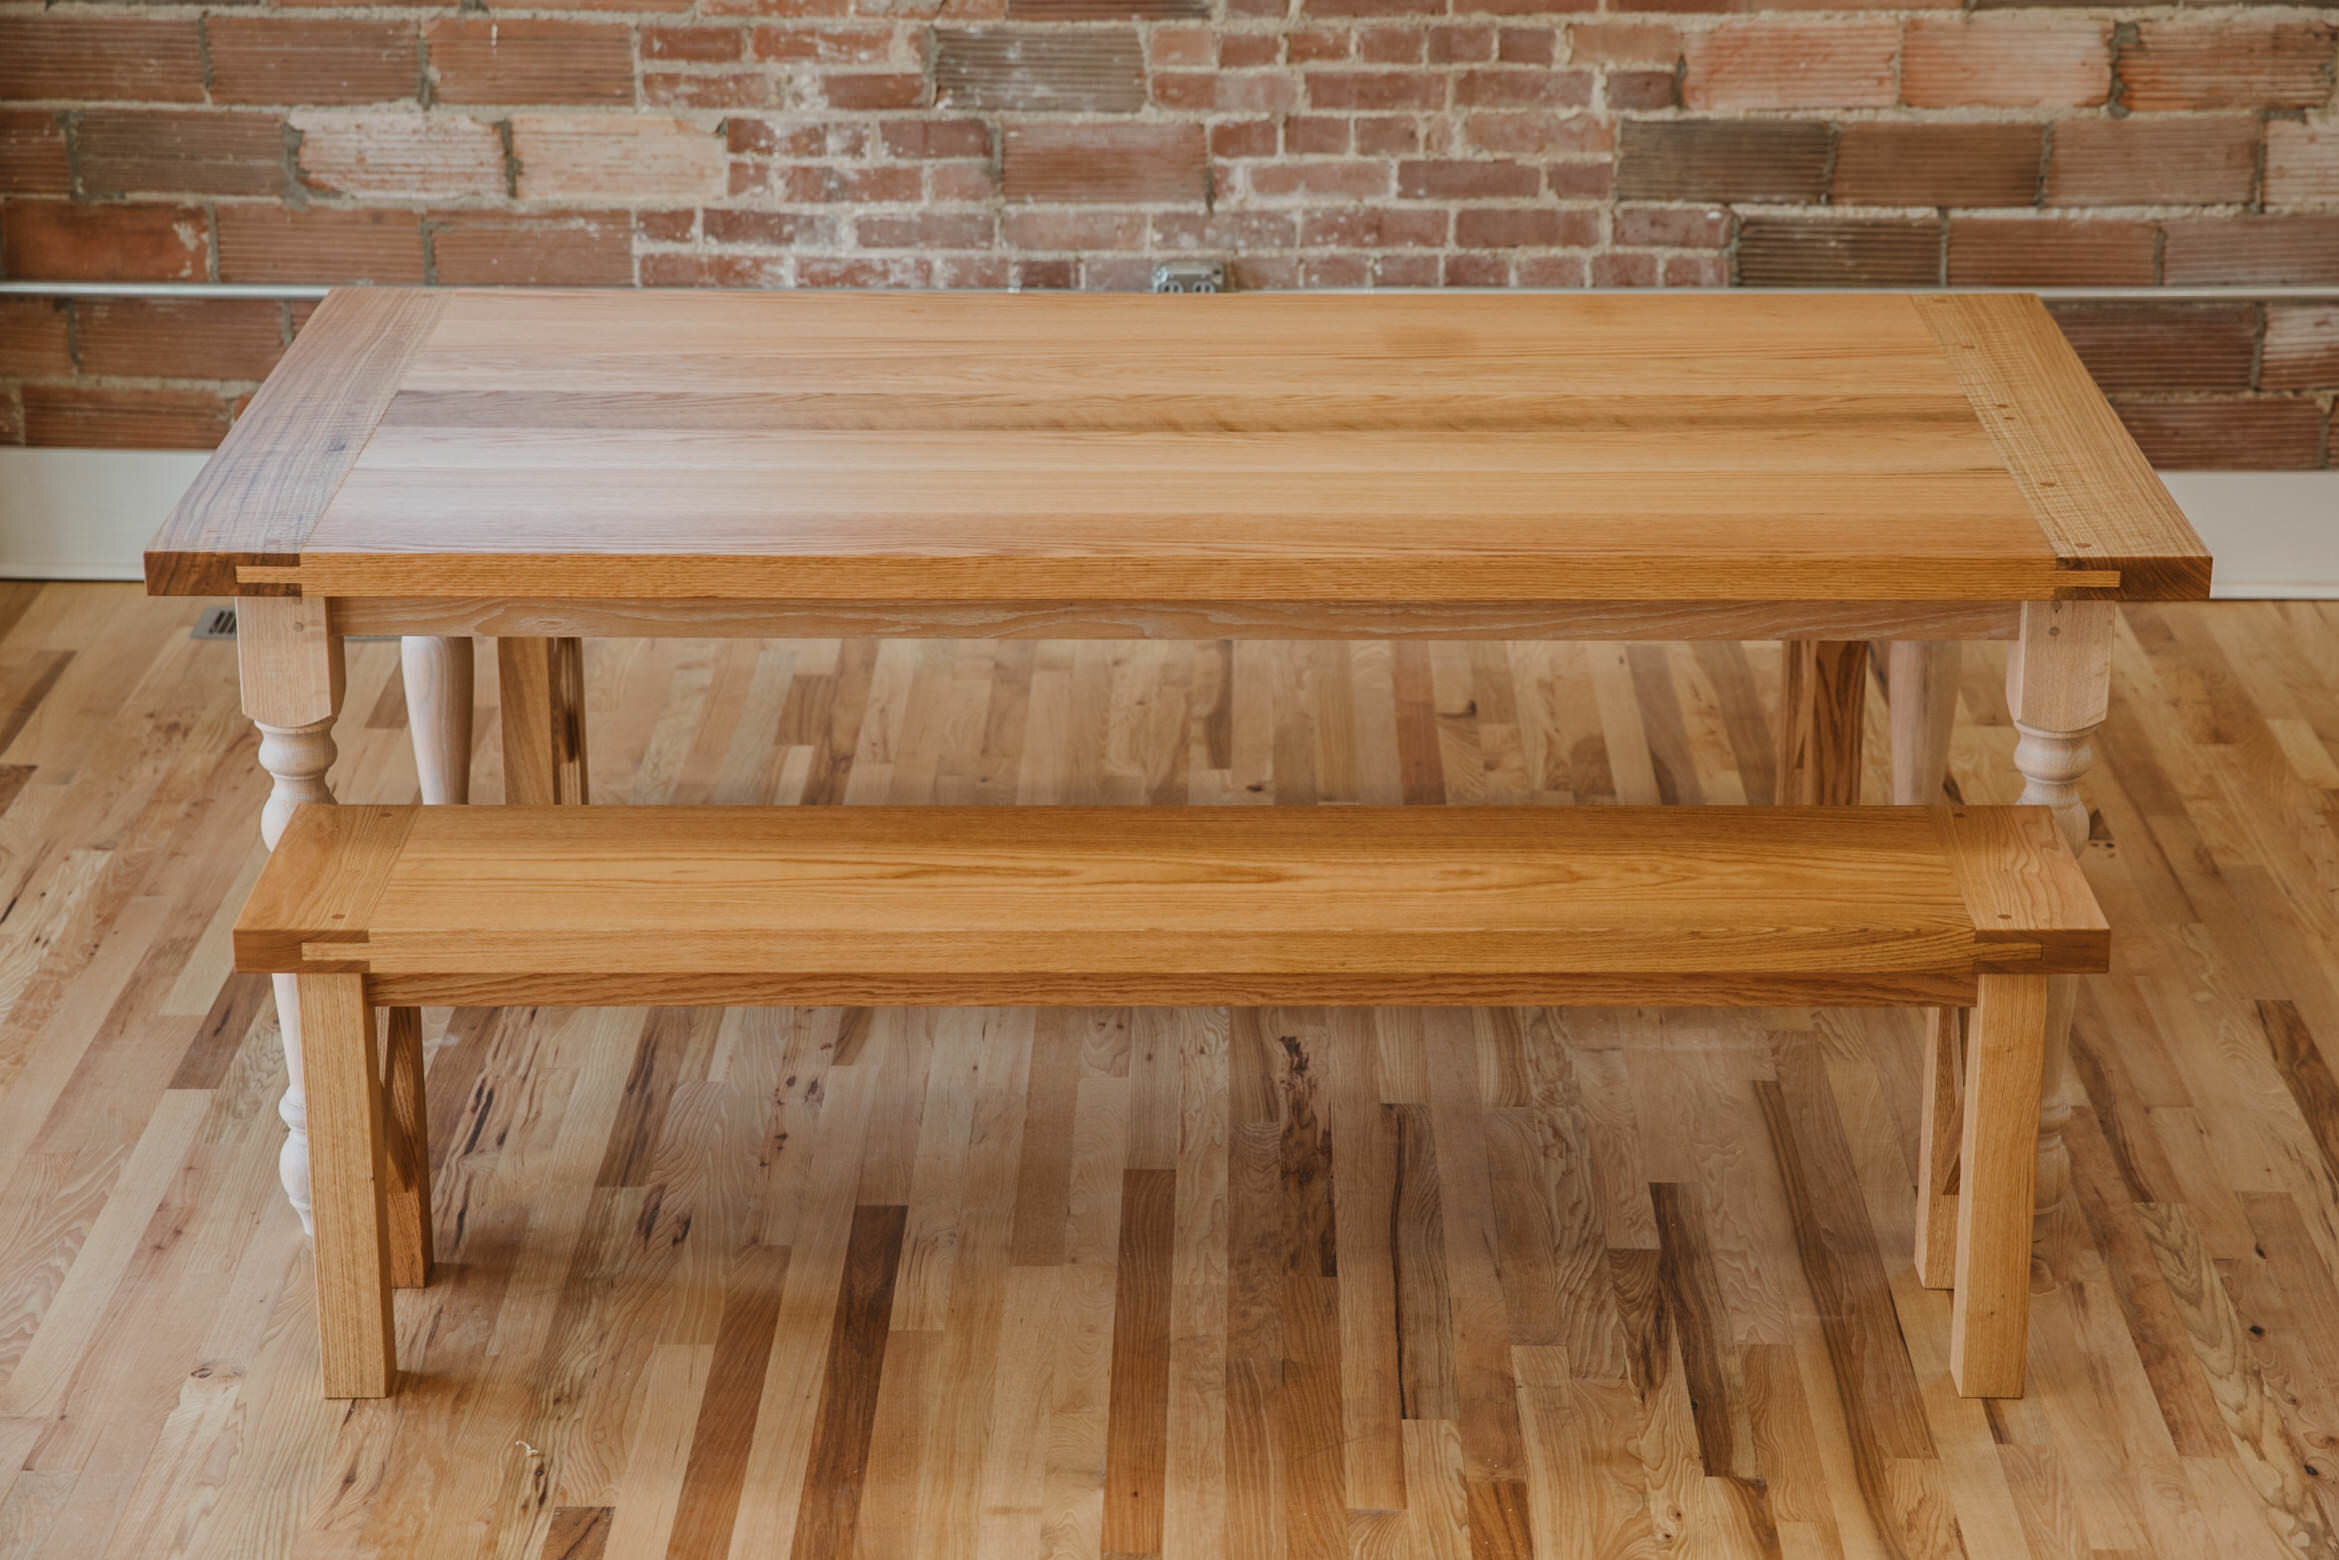 Big_tooth_Co-custom furniture maker_southern charm_farm_table_benches -21.jpg